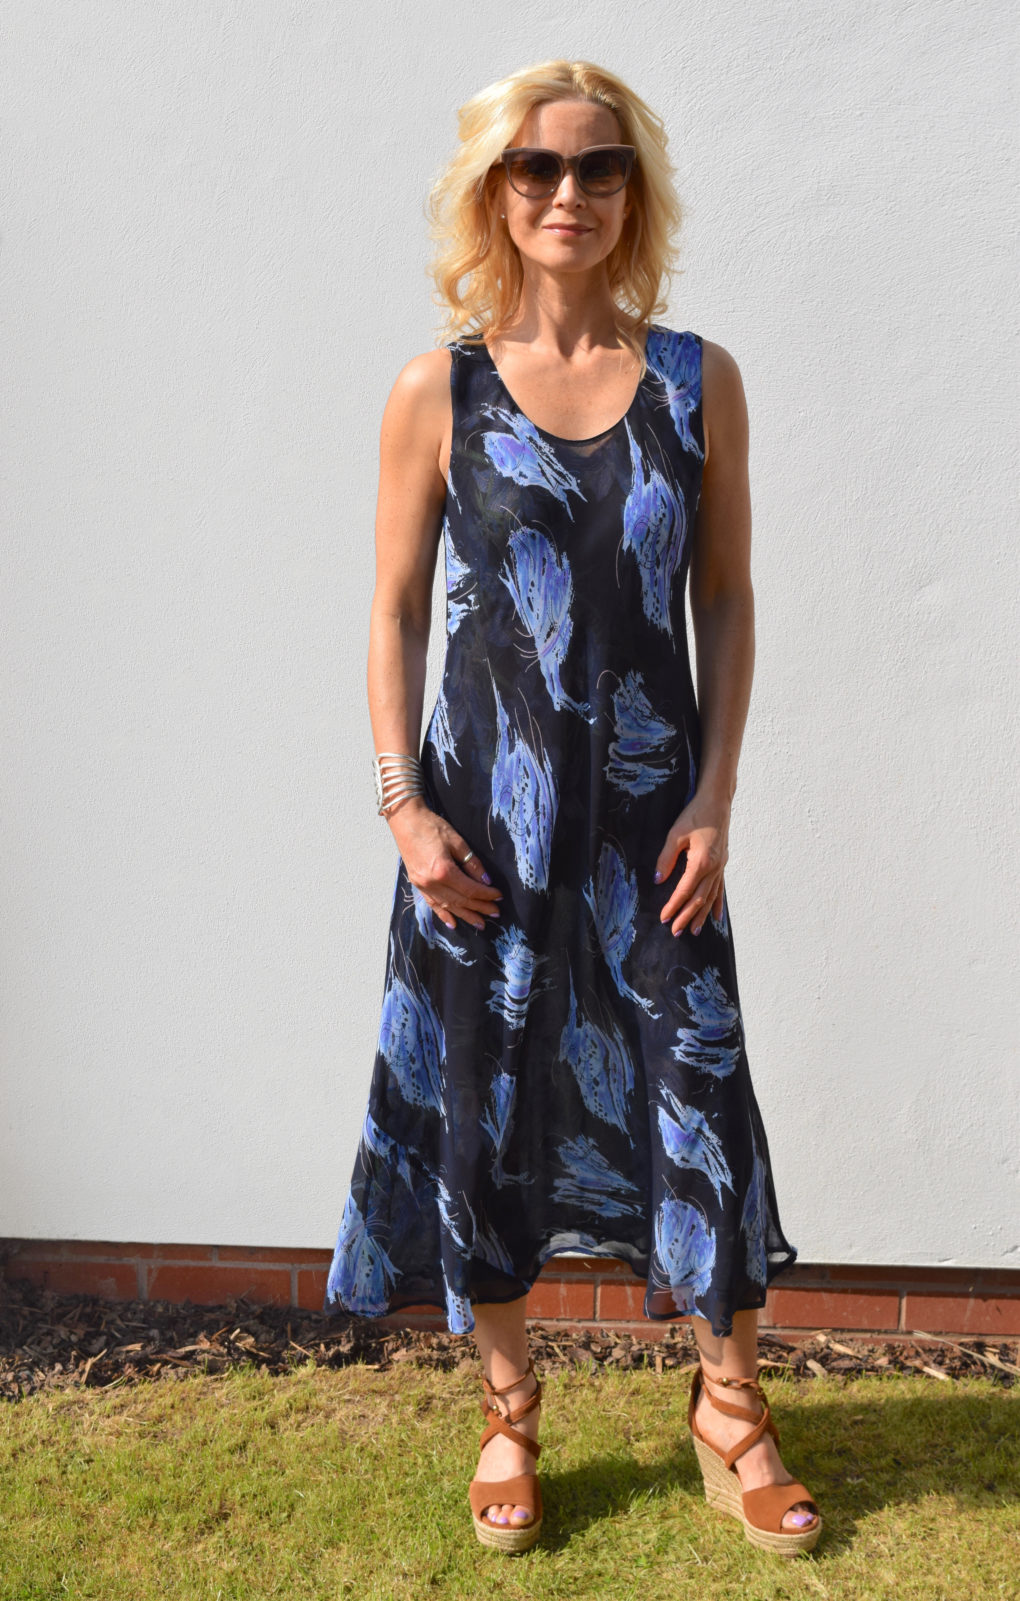 Paramour Reversible 2 in 1 dress7